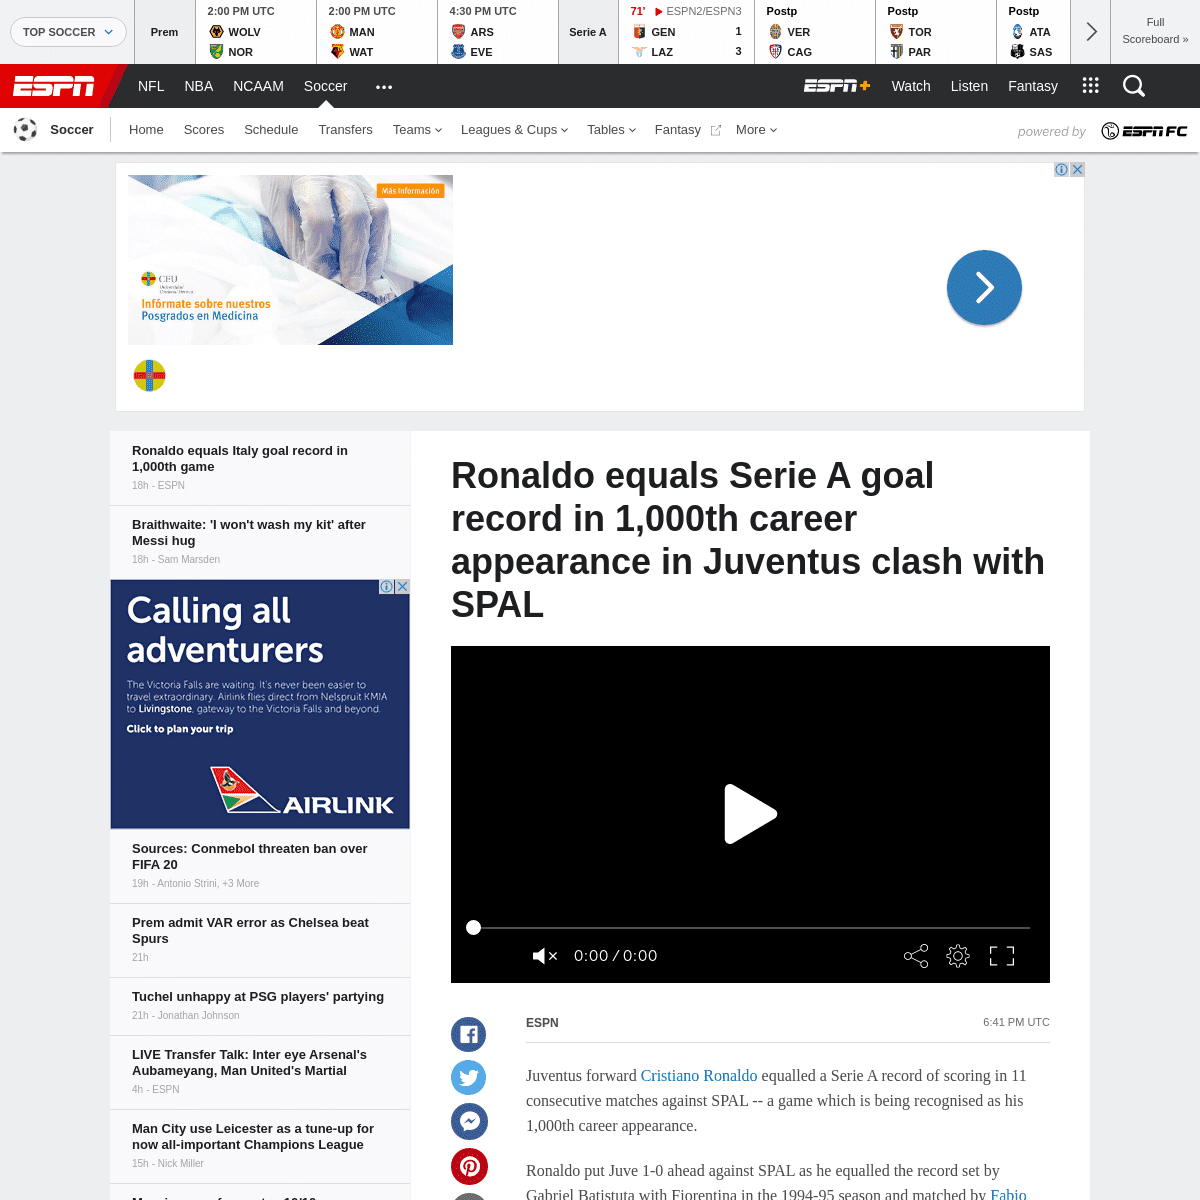 A complete backup of www.espn.com/soccer/juventus/story/4058087/ronaldo-equals-serie-a-goal-record-in-1